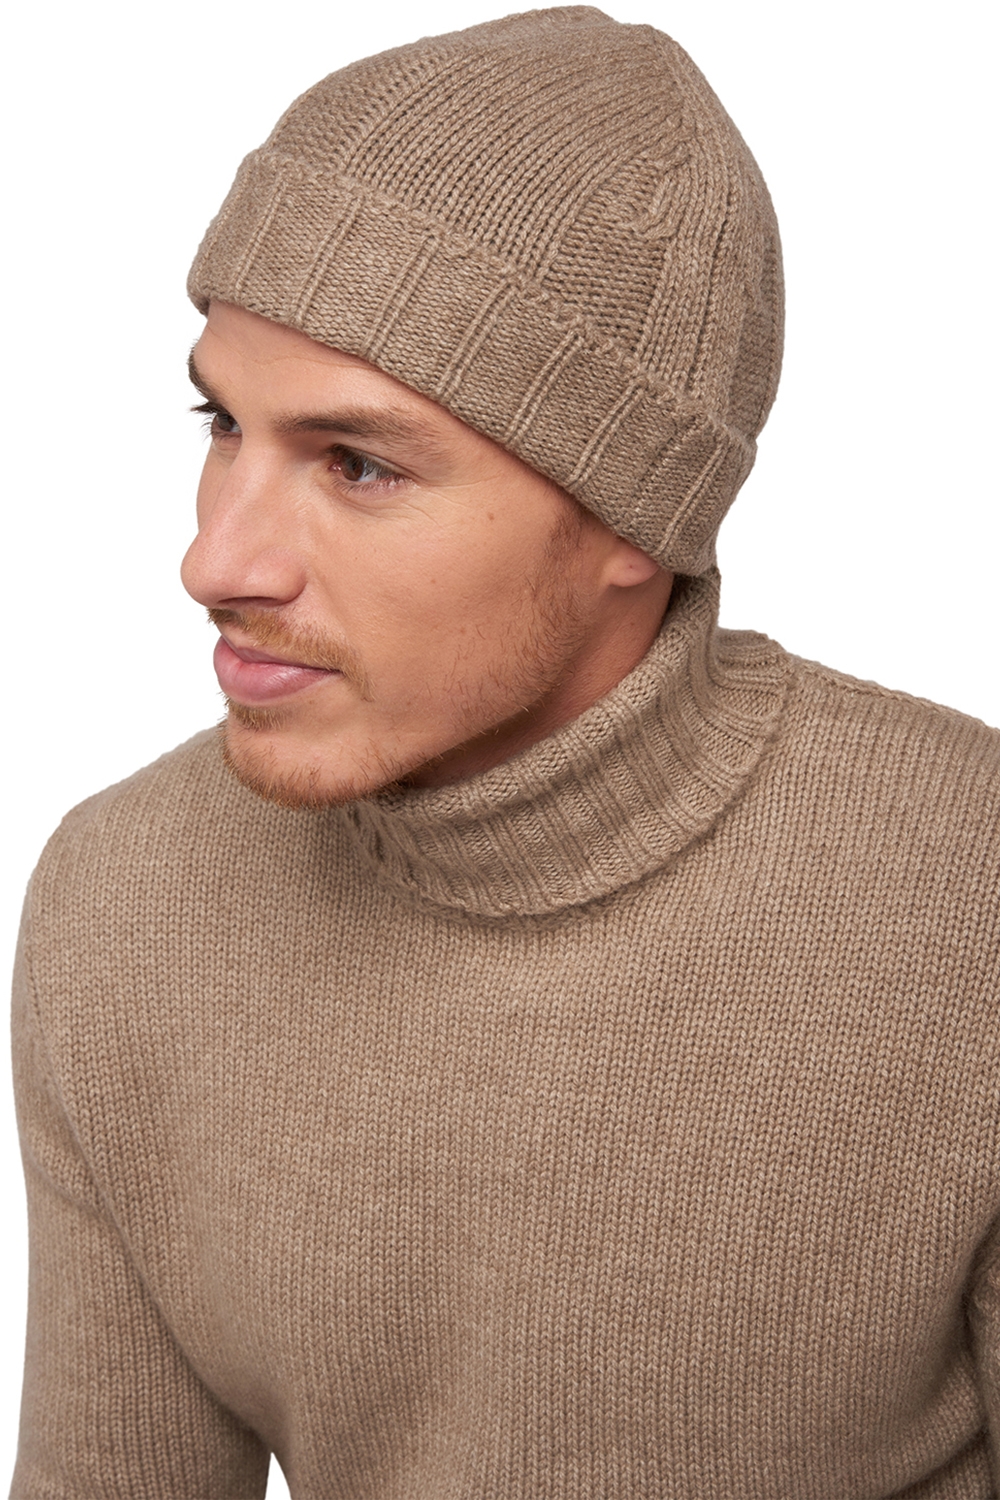 Cashmere uomo ted natural brown 24 5 x 16 5 cm